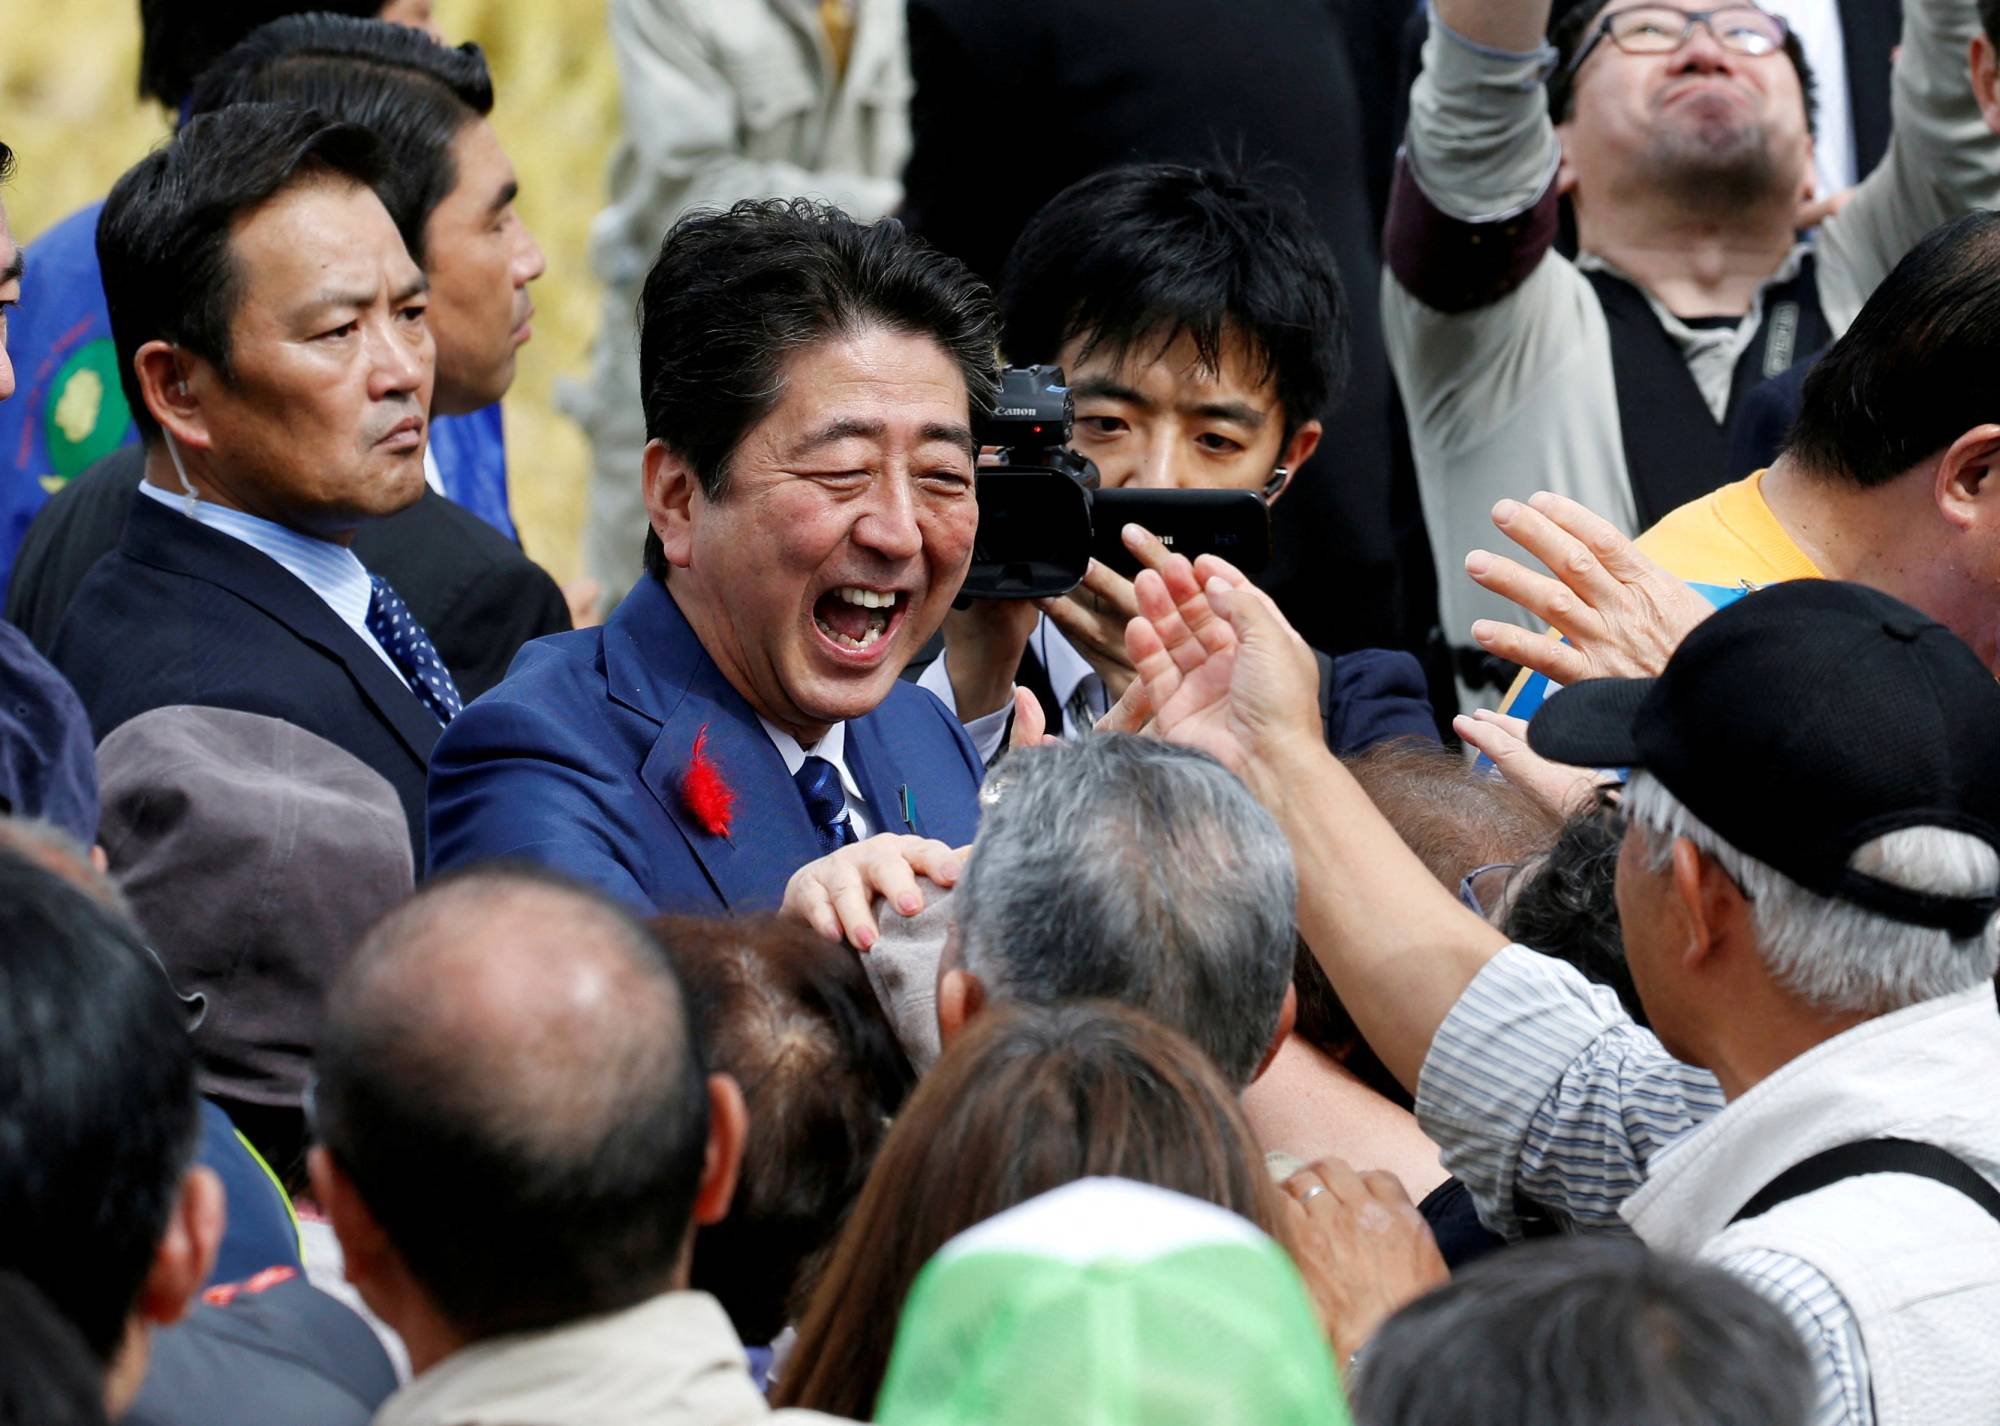 Abe shakes hands with supporters after a Lower House election campaign rally in Fukushima in October 2017. | REUTERS